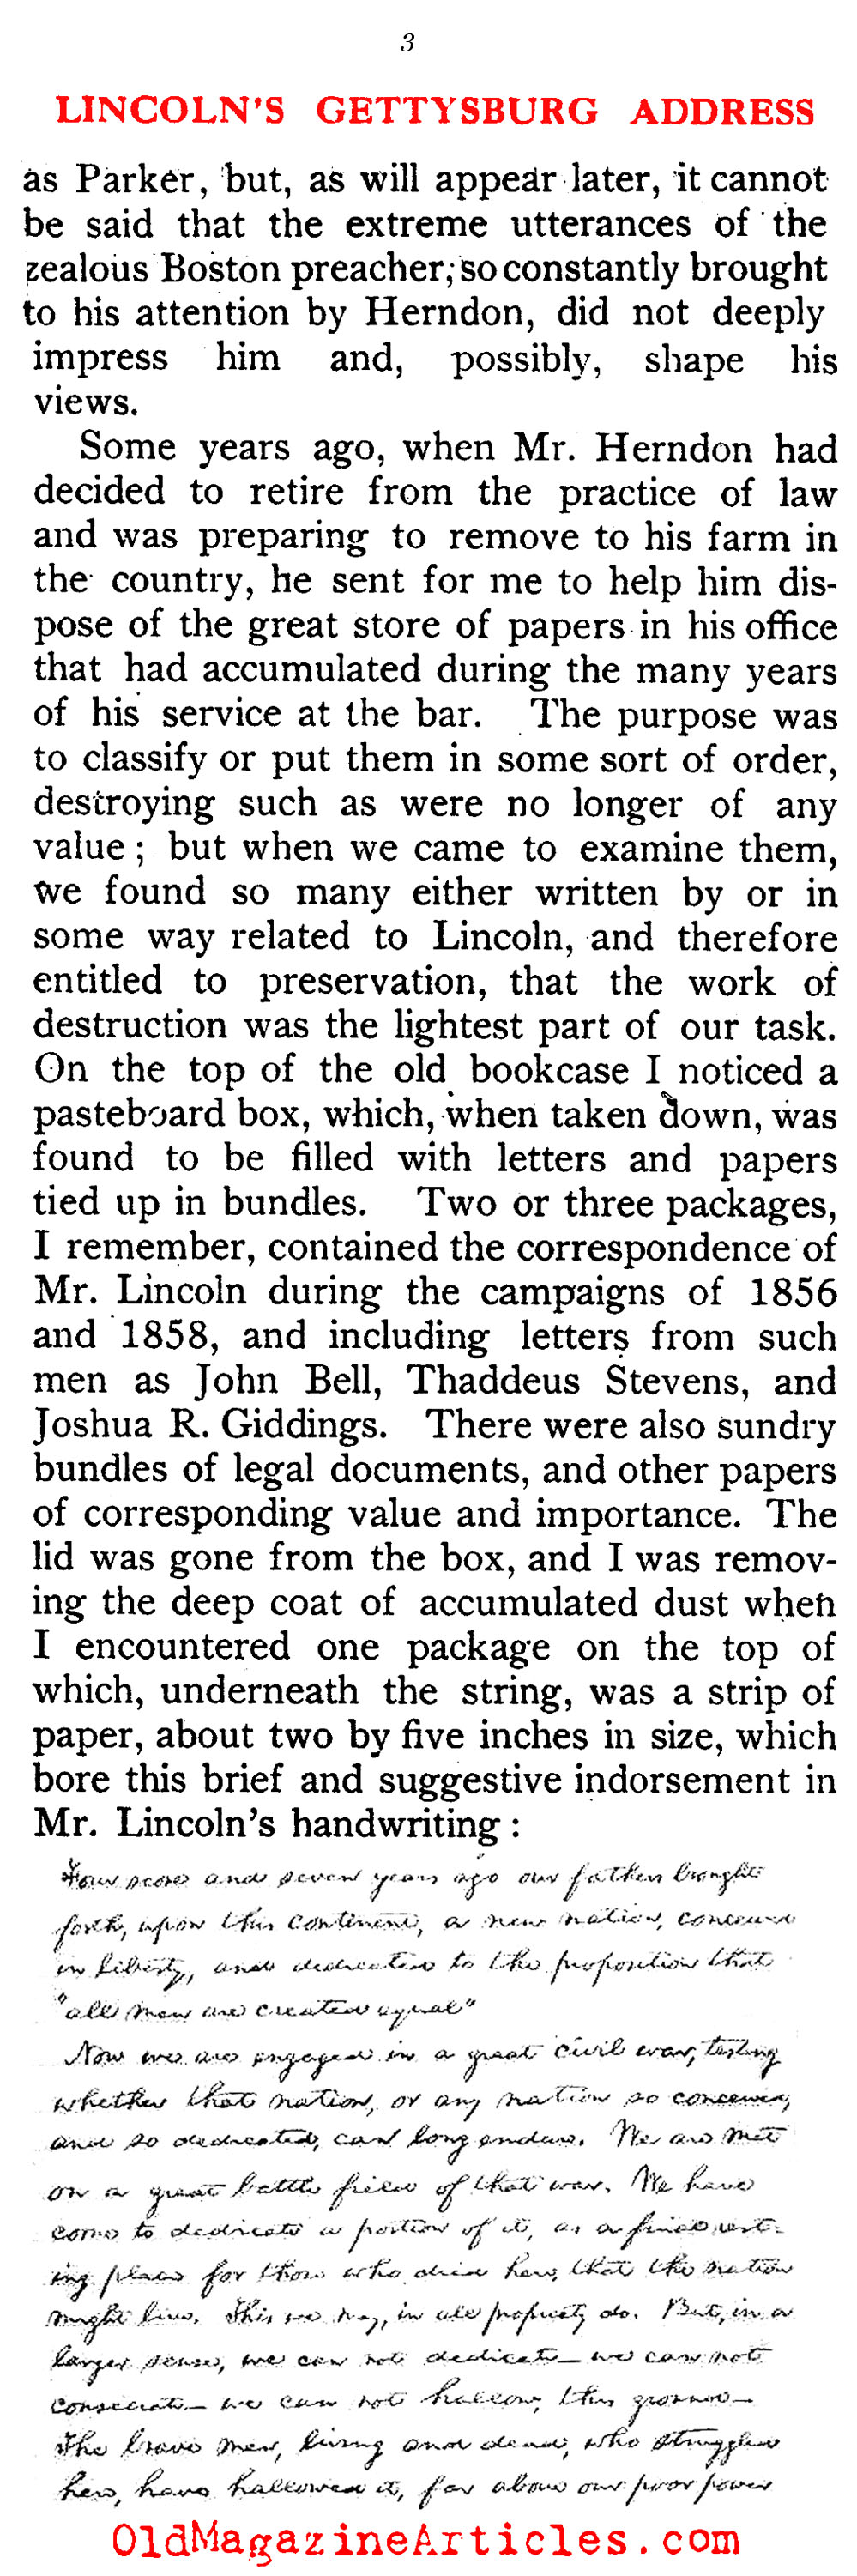 A Study of the Gettysburg Address   (The Outlook, 1913)